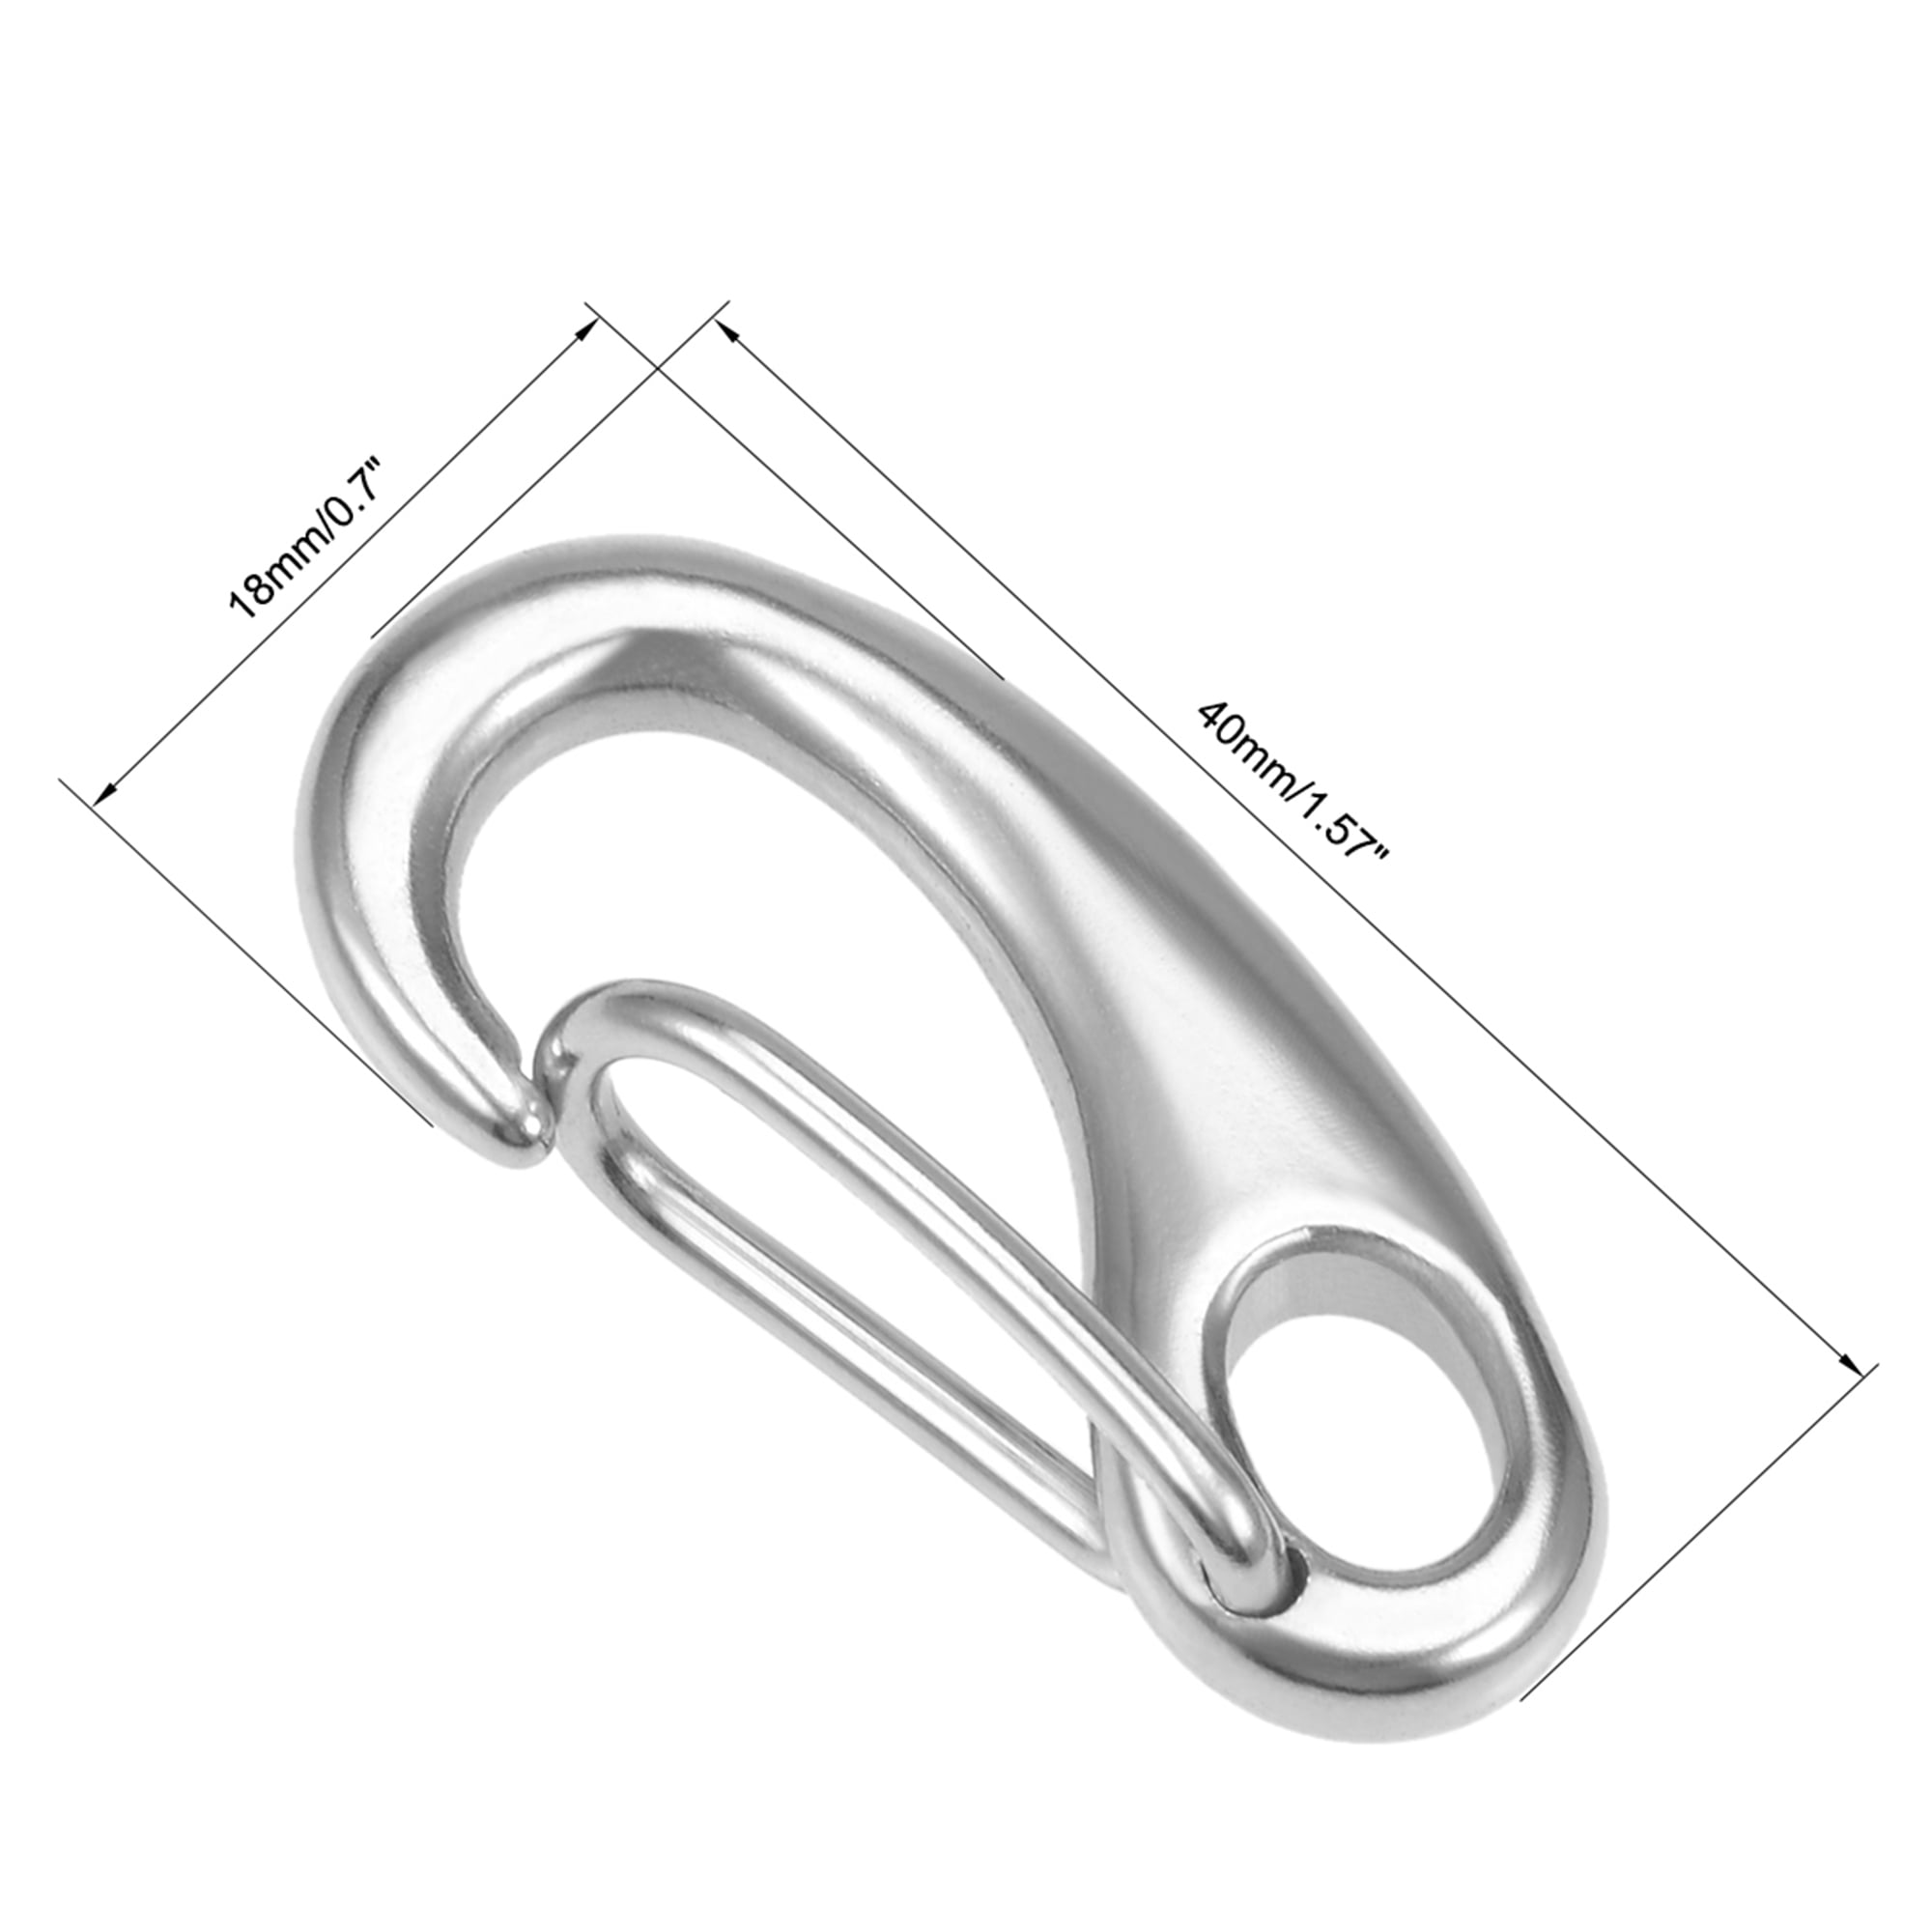 5PCS Egg Shape Snap Hooks 304 Stainless Steel 40mm 50mm 70mm 100mm Length  Safety Metal SS Quick Release Spring Snap Hook Link - AliExpress